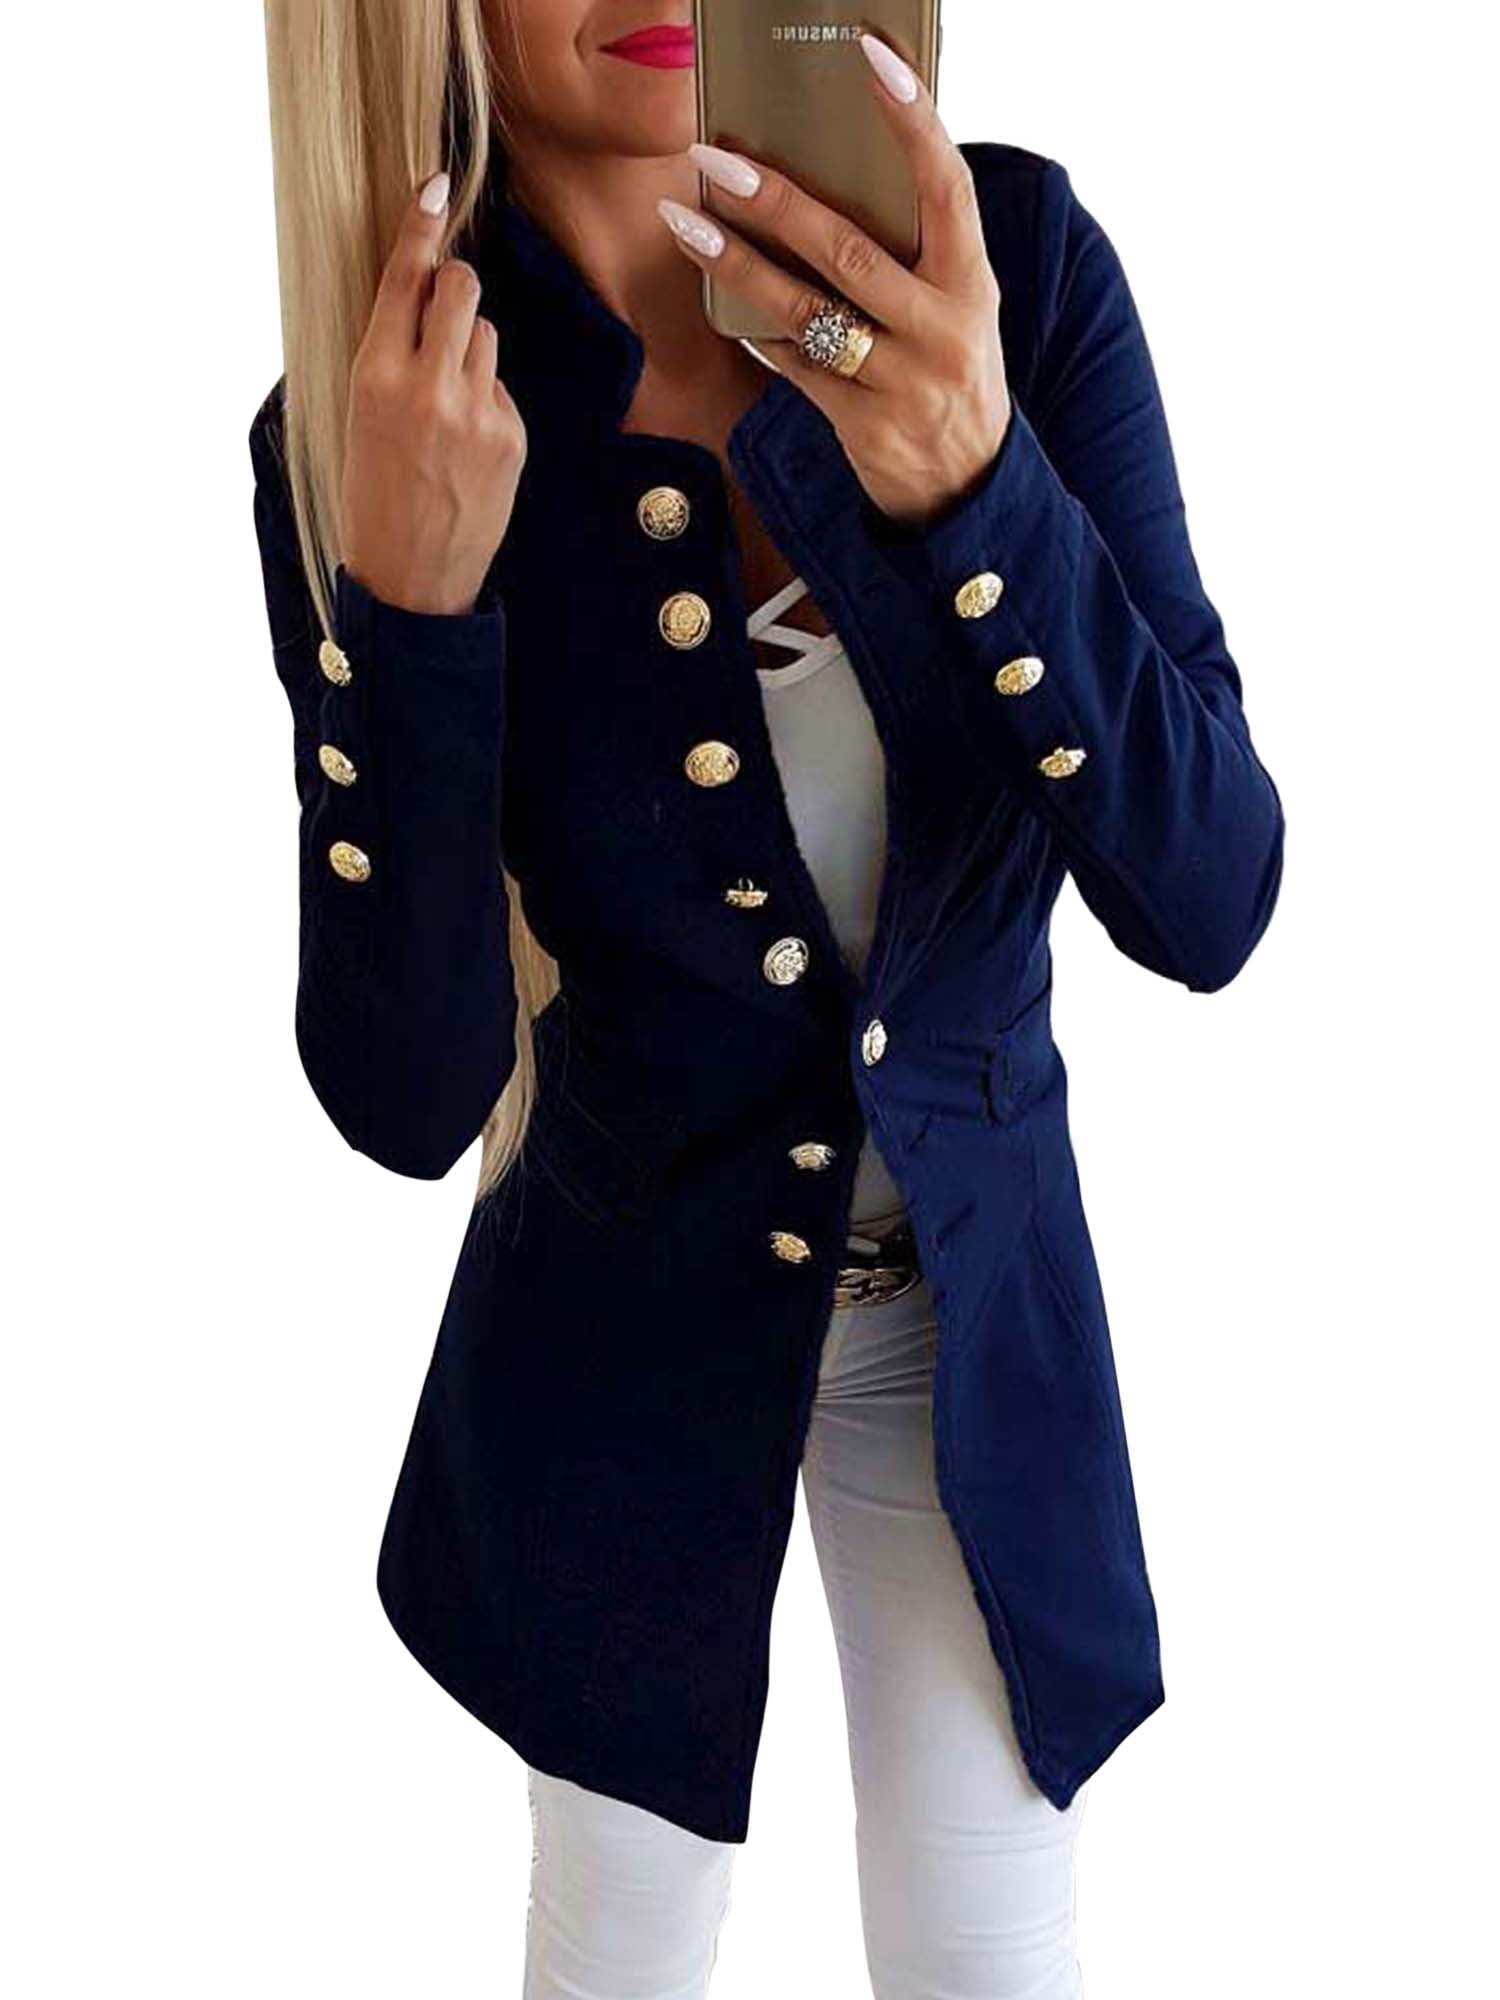 Women's Long Sleeve Casual Blazer Work Office Bussiness Jacket with Pocket 